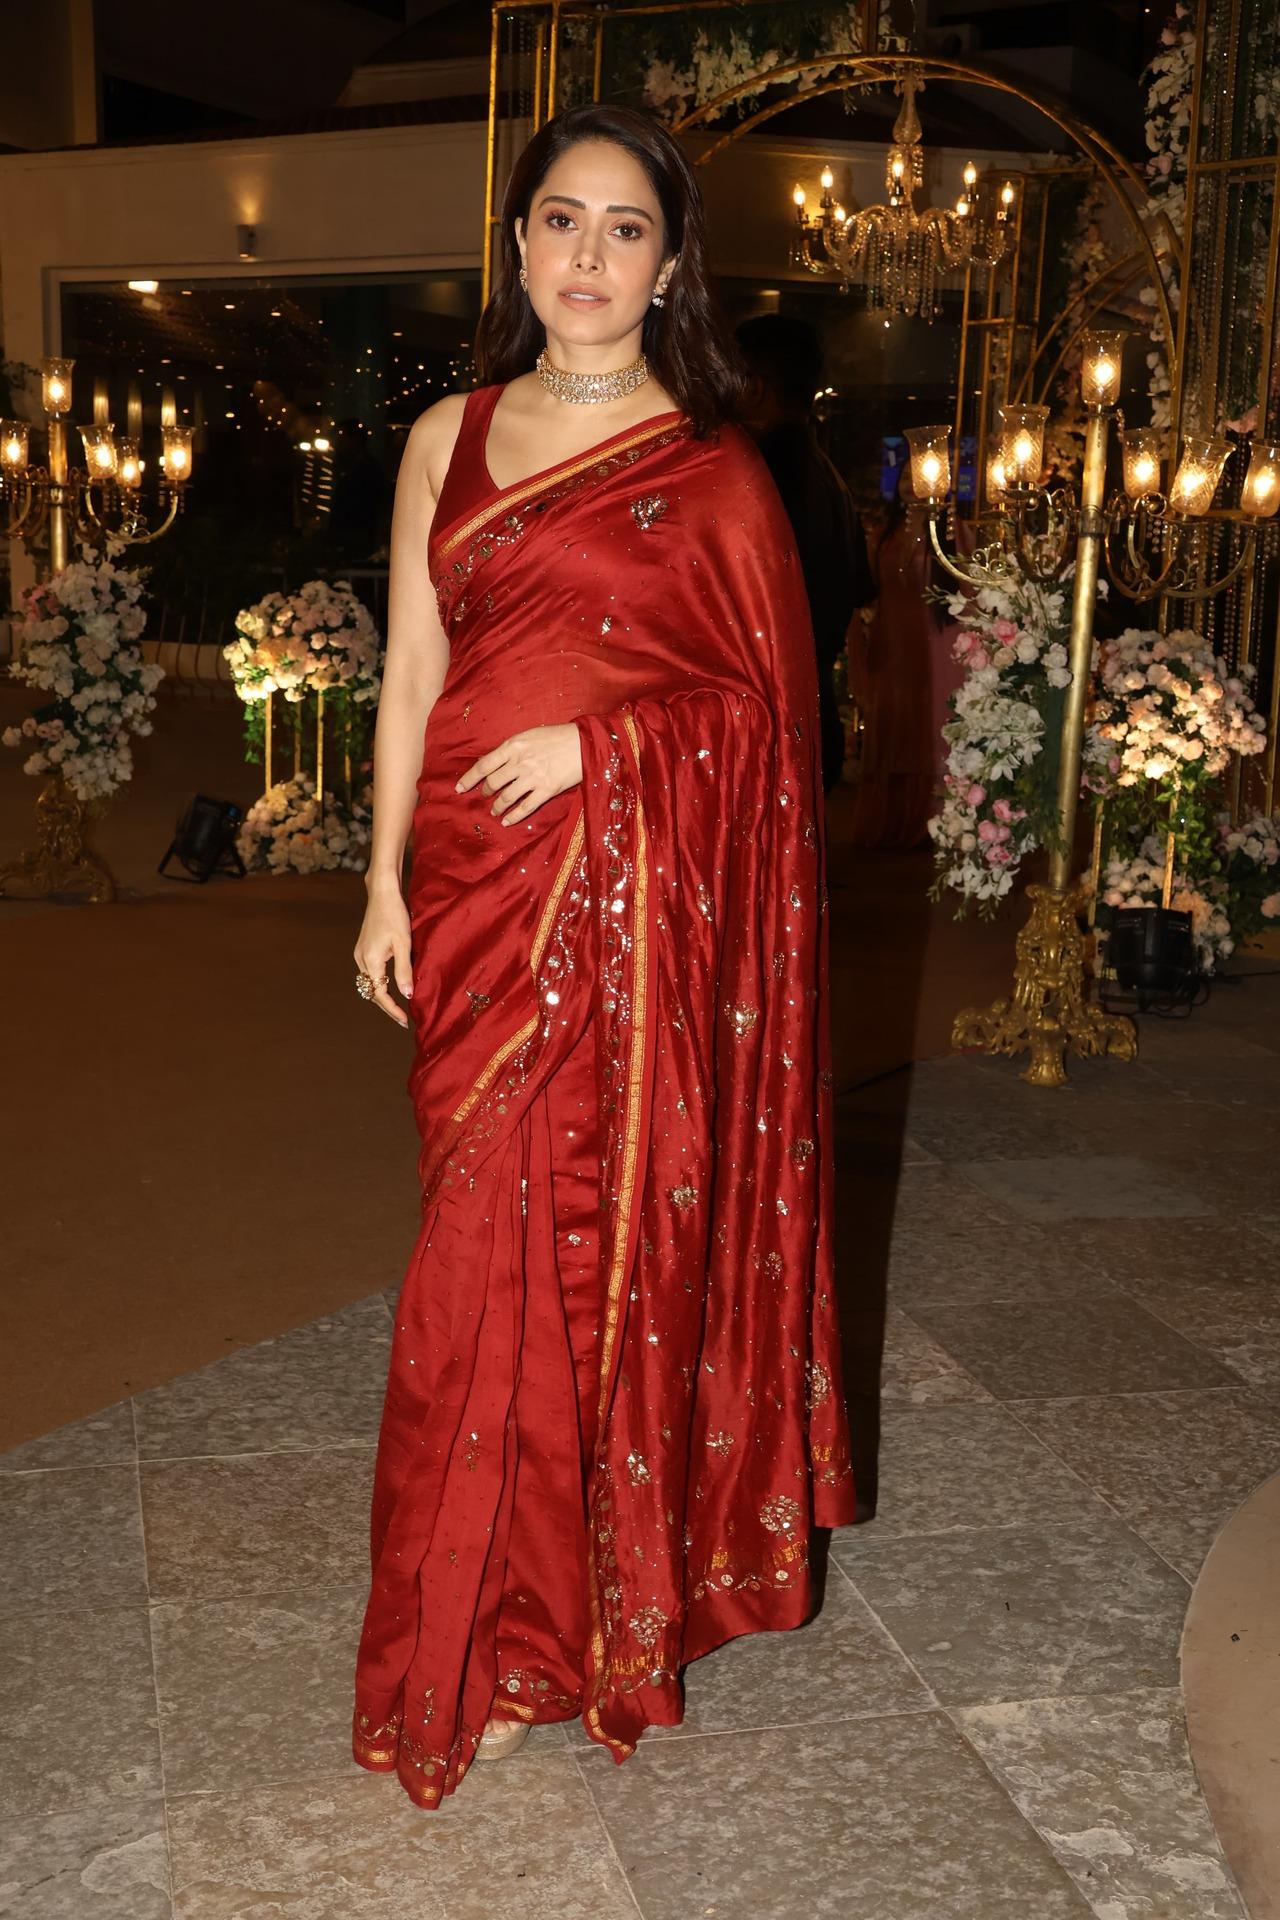 Nushrratt Bharuccha also attended the reception party in a stunning red saree, and it was all things glamour